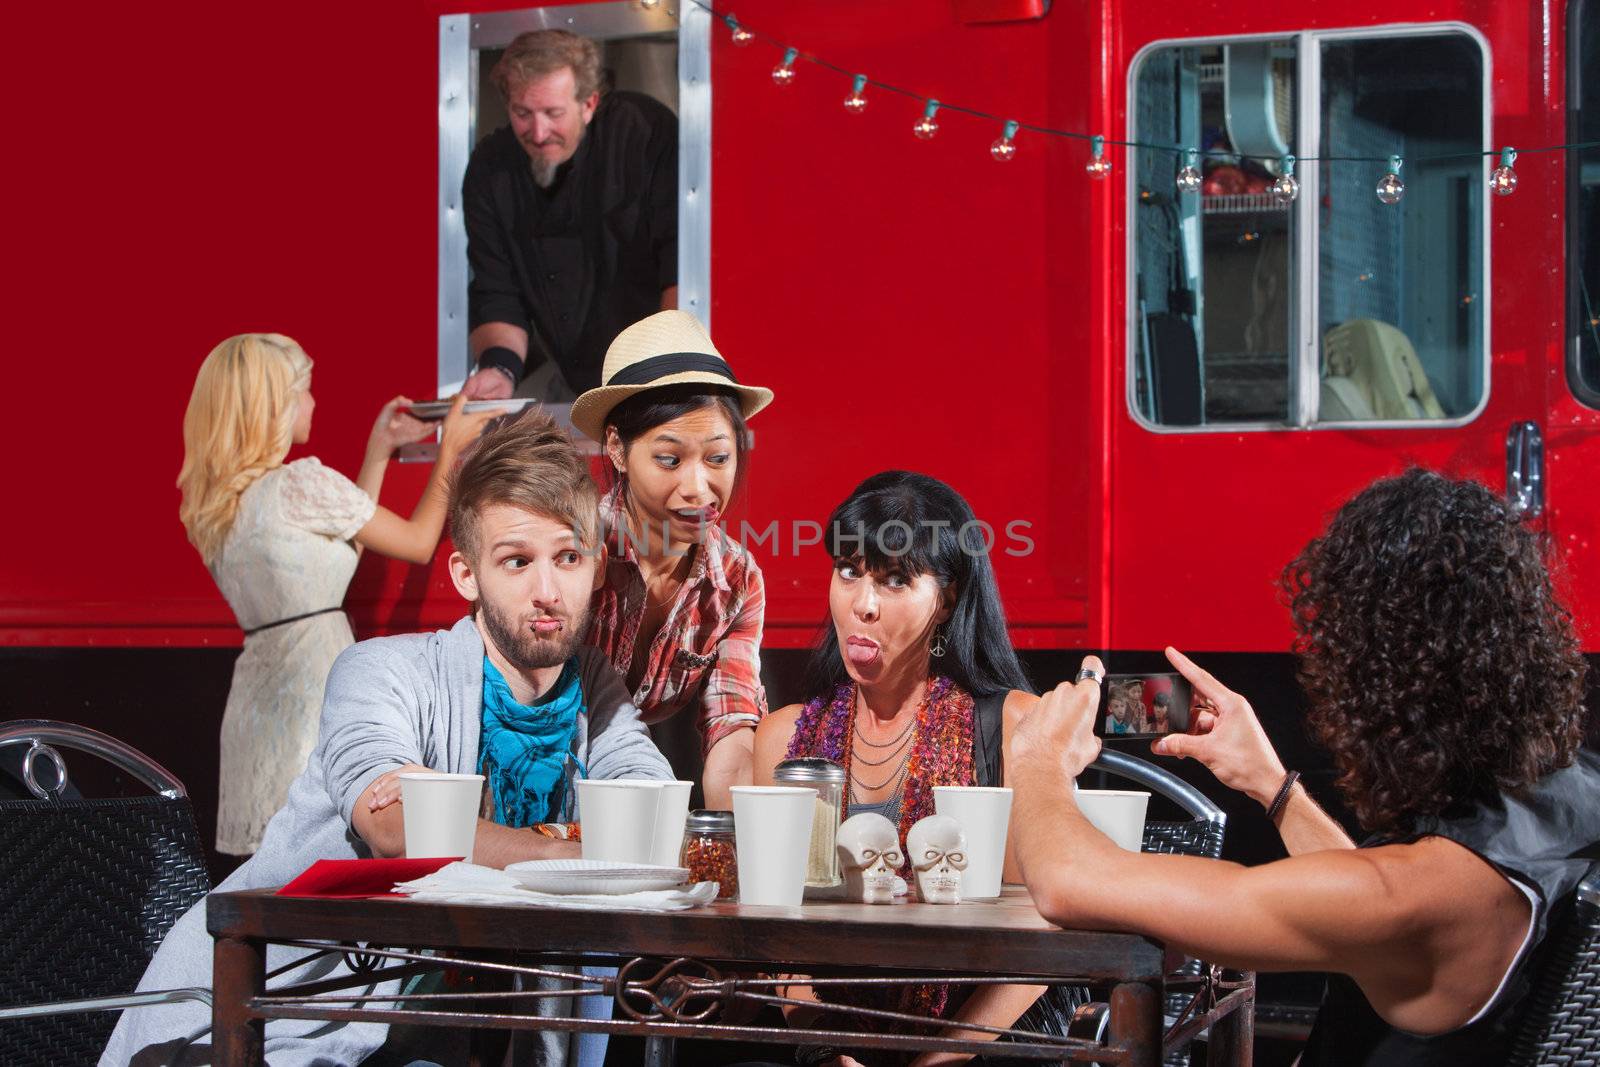 Taking Pictures at Mobile Cafe by Creatista